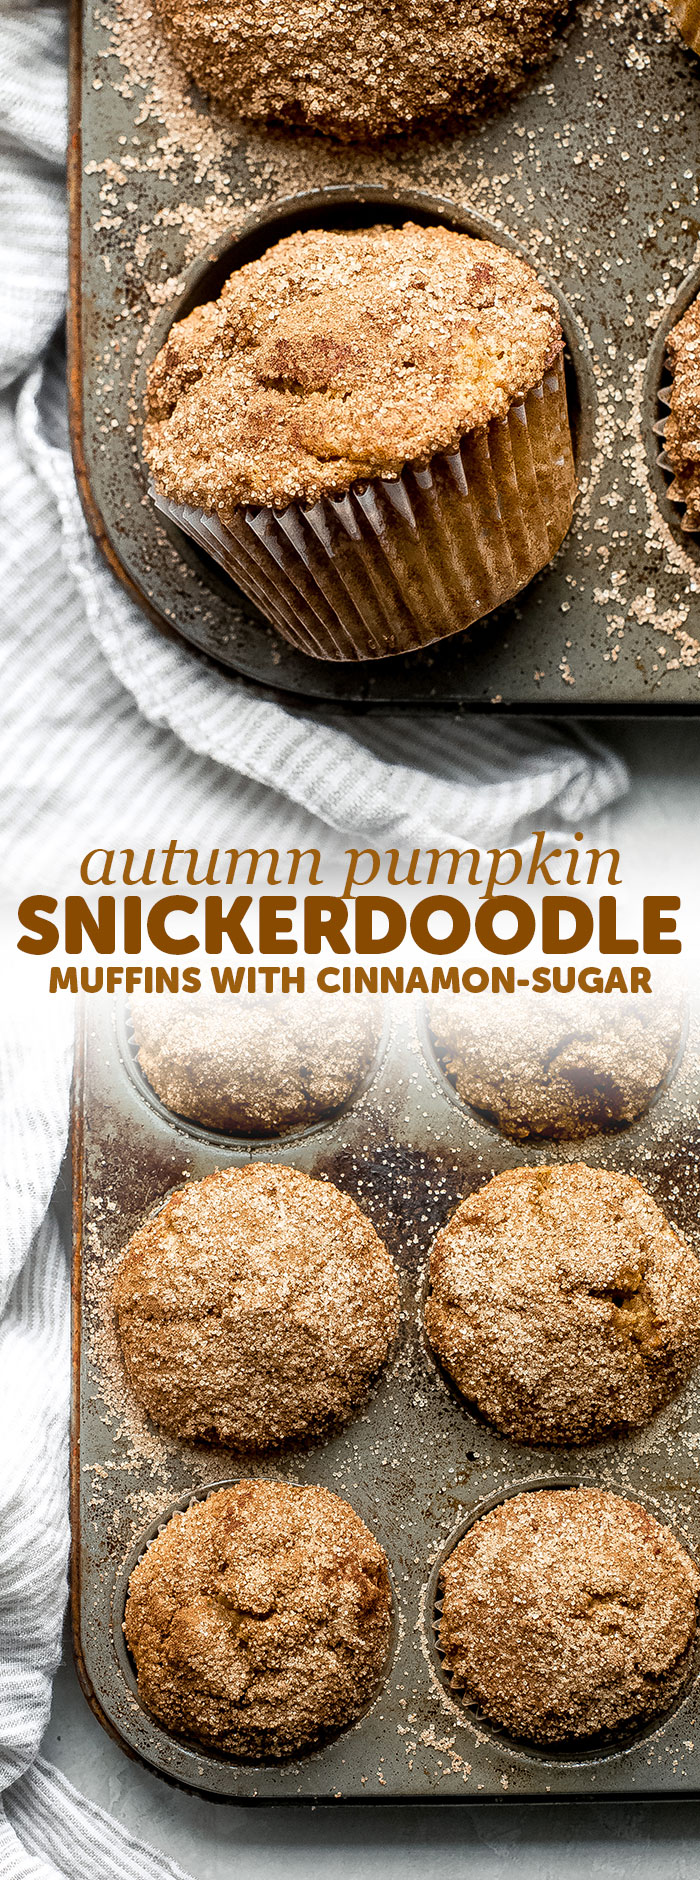 Pumpkin Snickerdoodle Muffins - everything you love about snickerdoodle cookies and pumpkin muffins smushed together into one! Tender and so delicious with a cup of coffee in the fall! #pumpkinmuffins #bestpumpkinmuffins #pumpkinrecipes #fallbakingrecipes #fallbaking #snickerdoodle | Littlespicejar.com